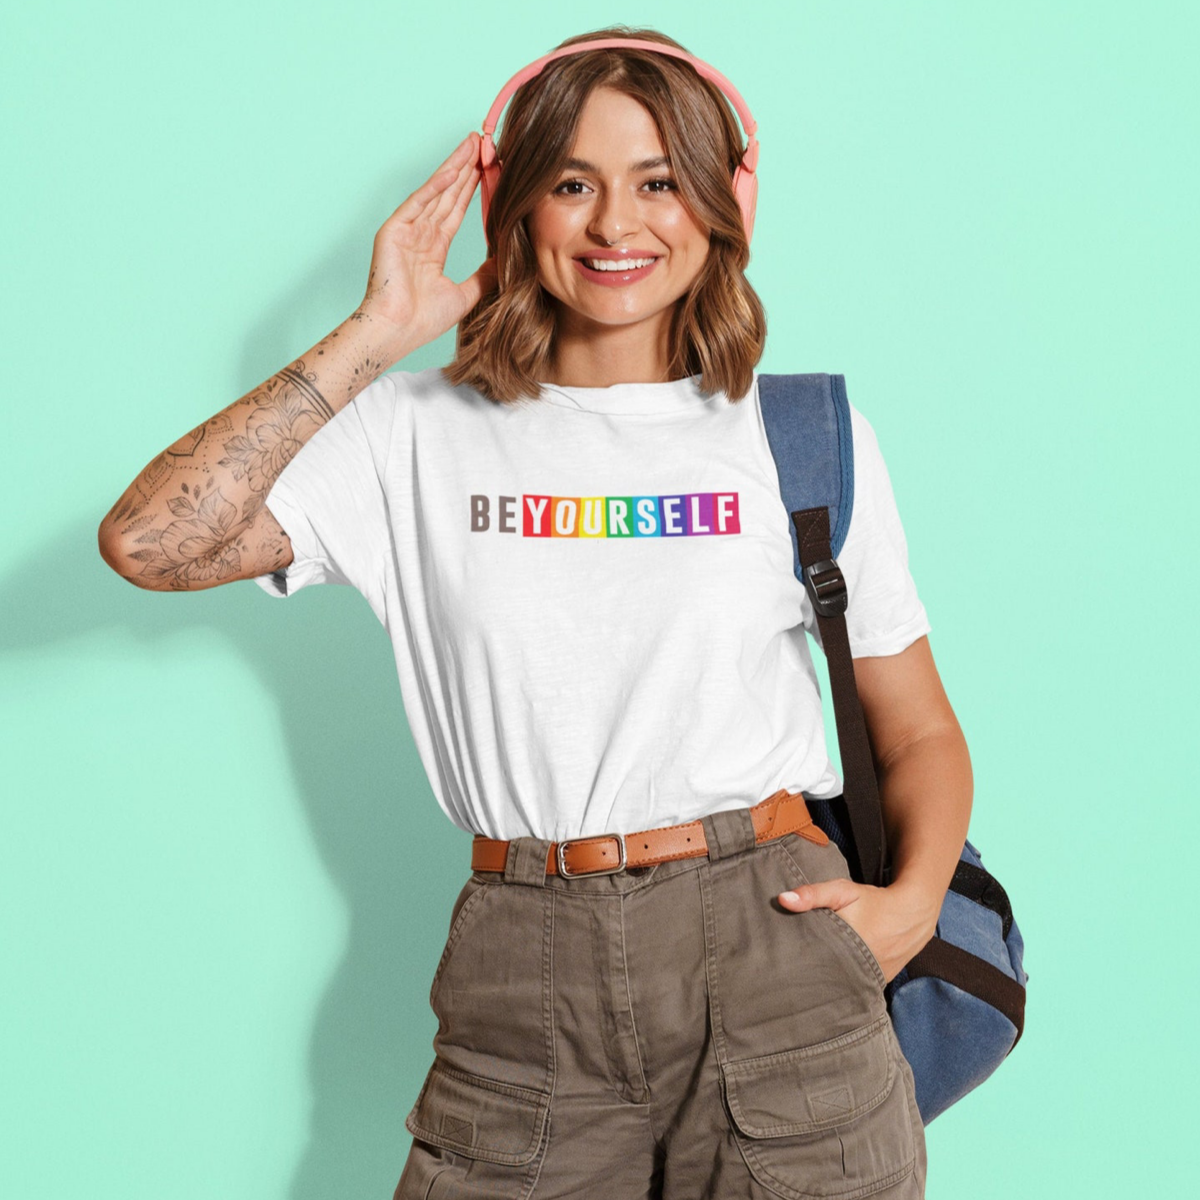 Small LGBTQ+ Businesses to Support During Pride & Always